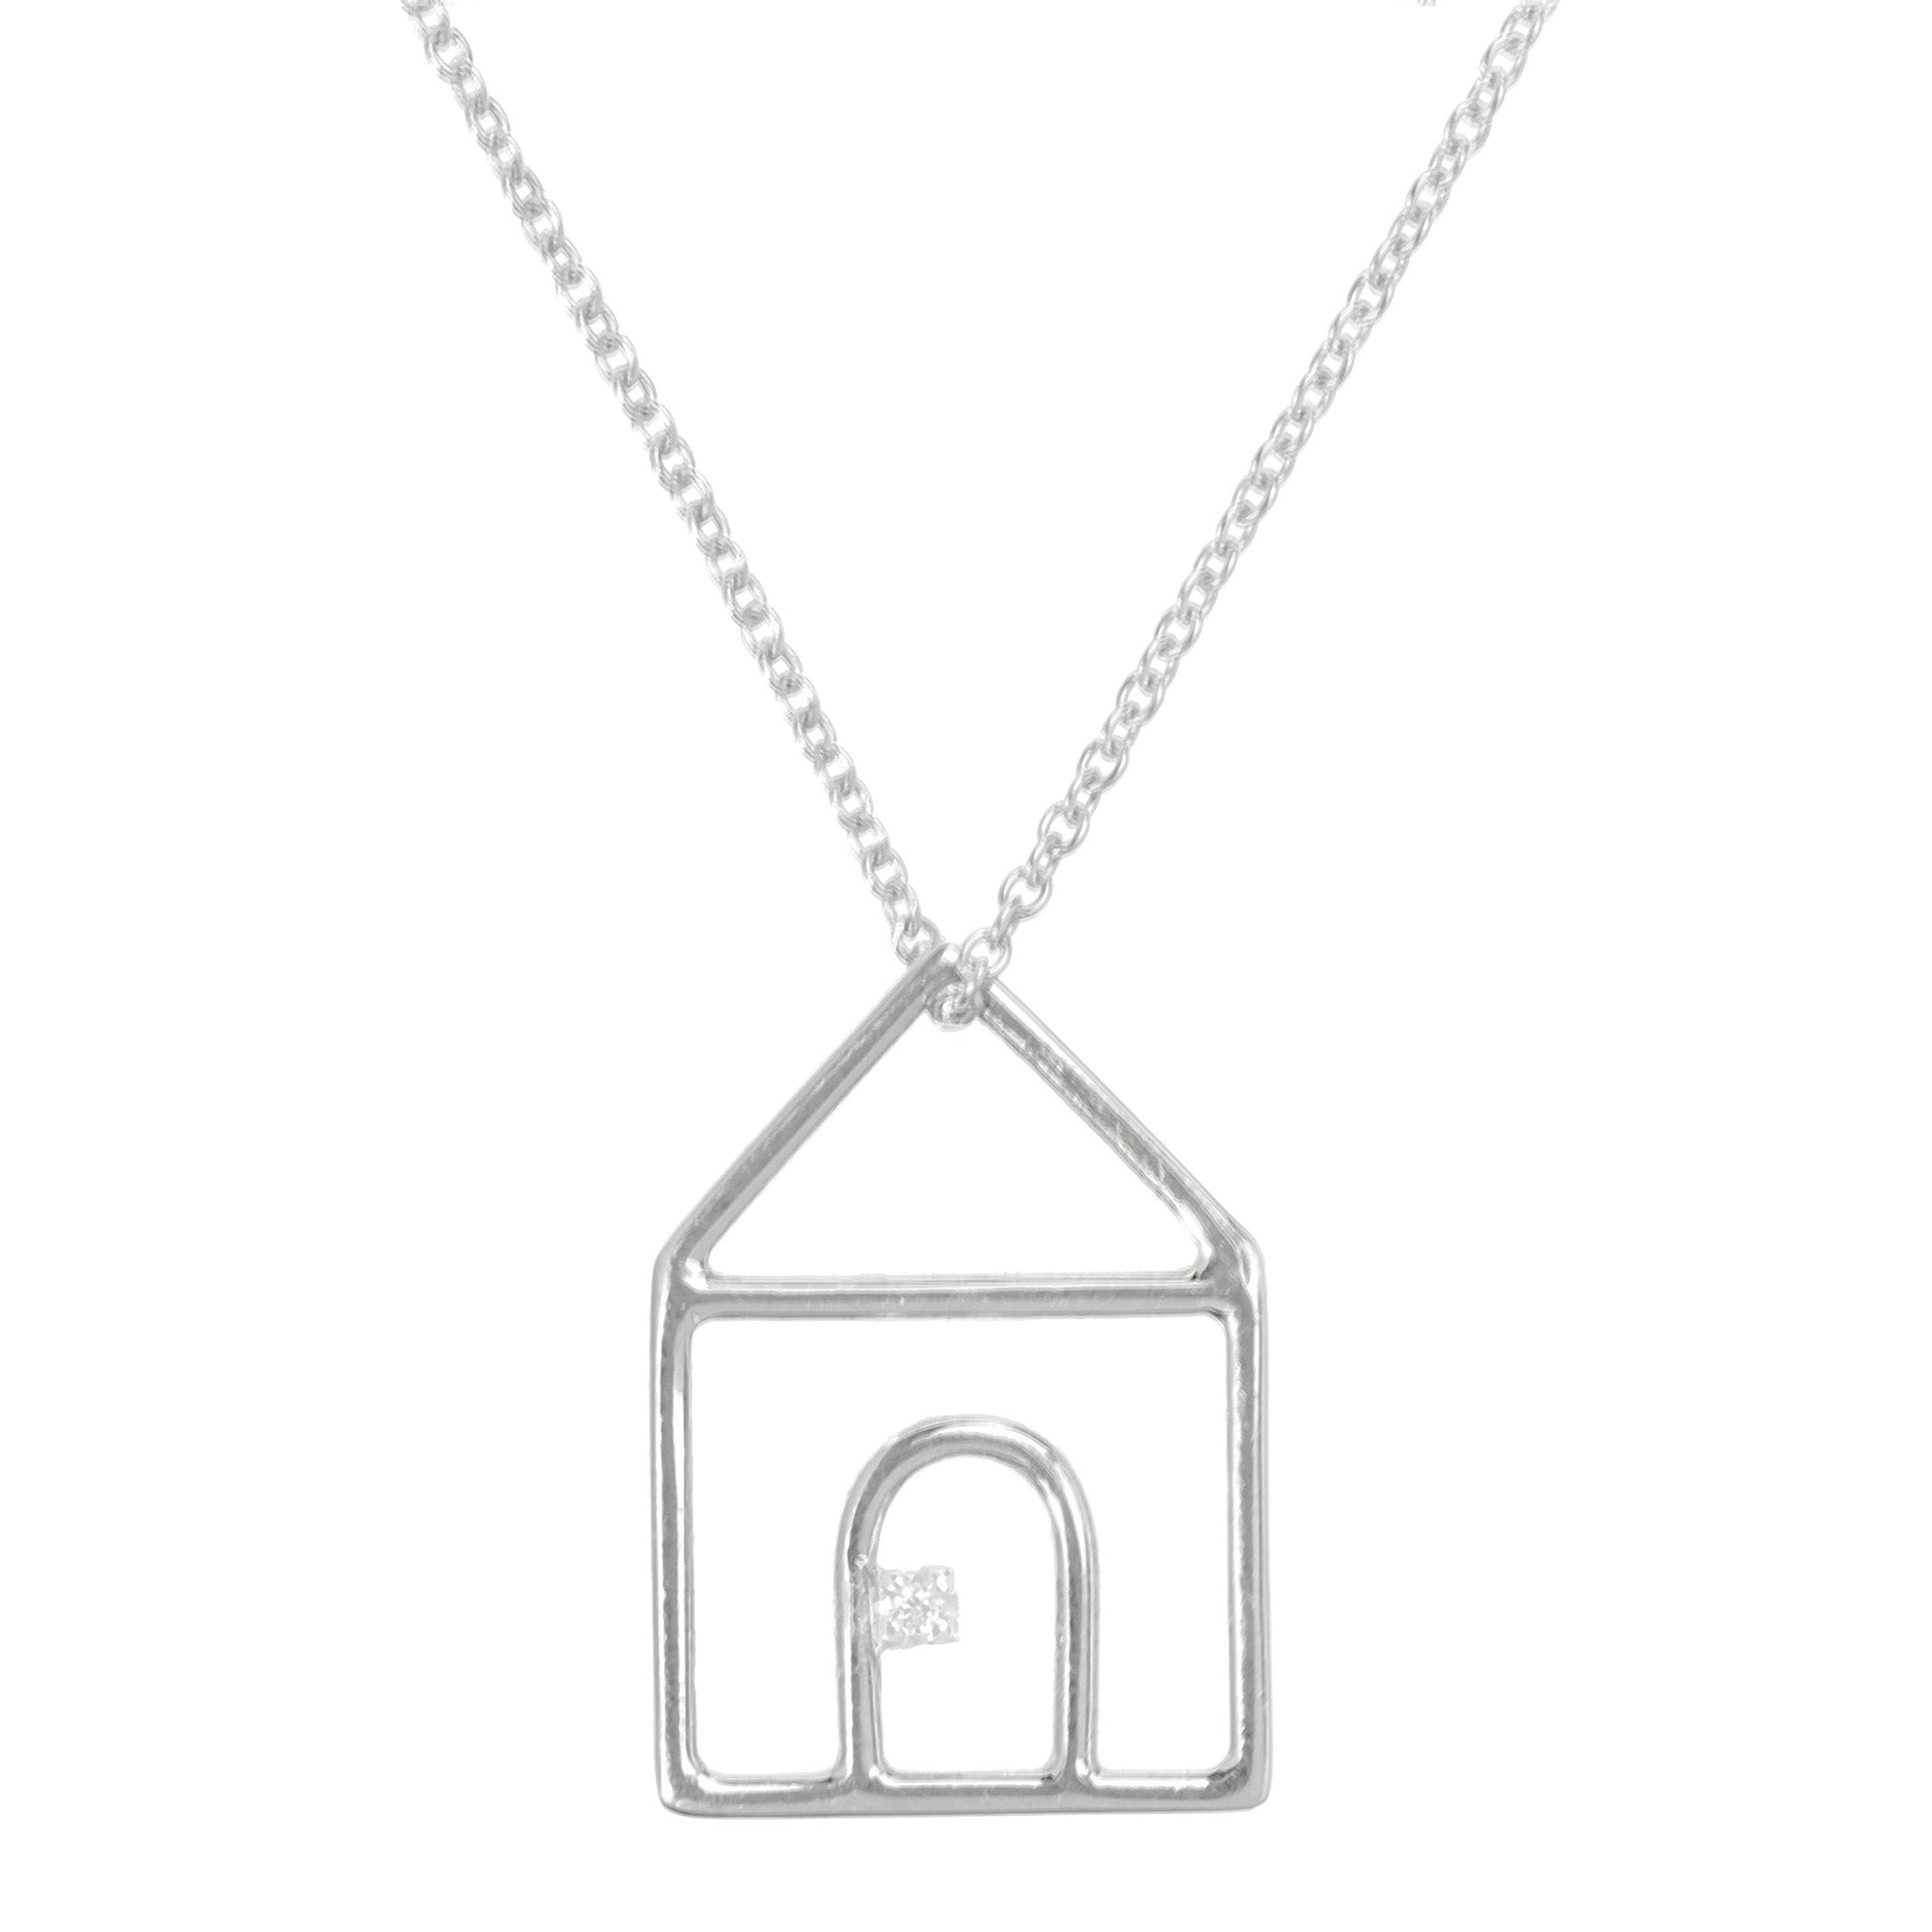 White gold chain necklace with house shaped pendant and small diamond